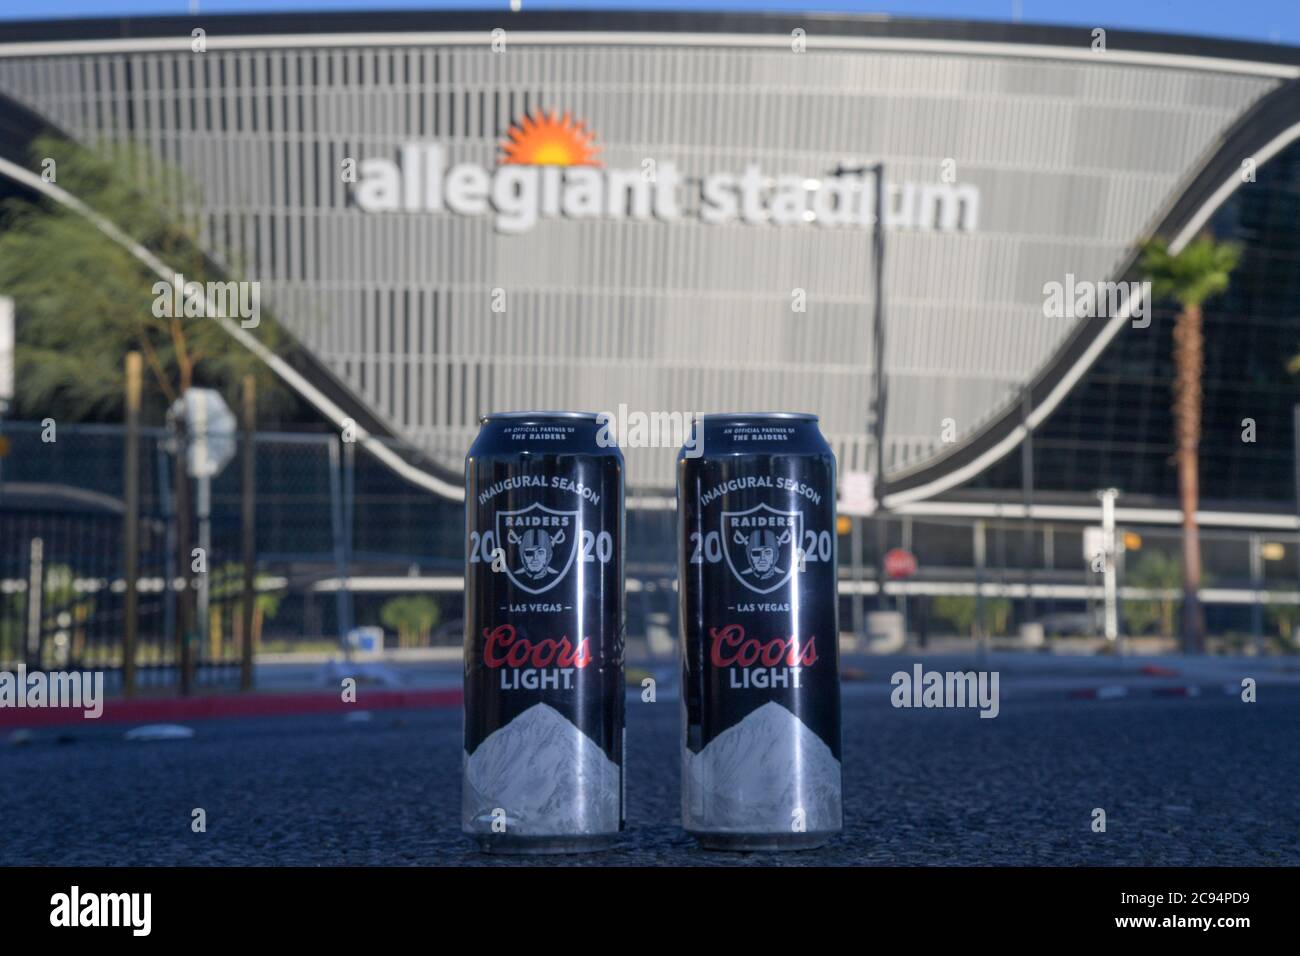 Forgot to tell y'all! New aluminum silver raiders cups at allegiant when  you order a coors light! Feel super cold in hand when a cold beer poured  into them. Made by ball